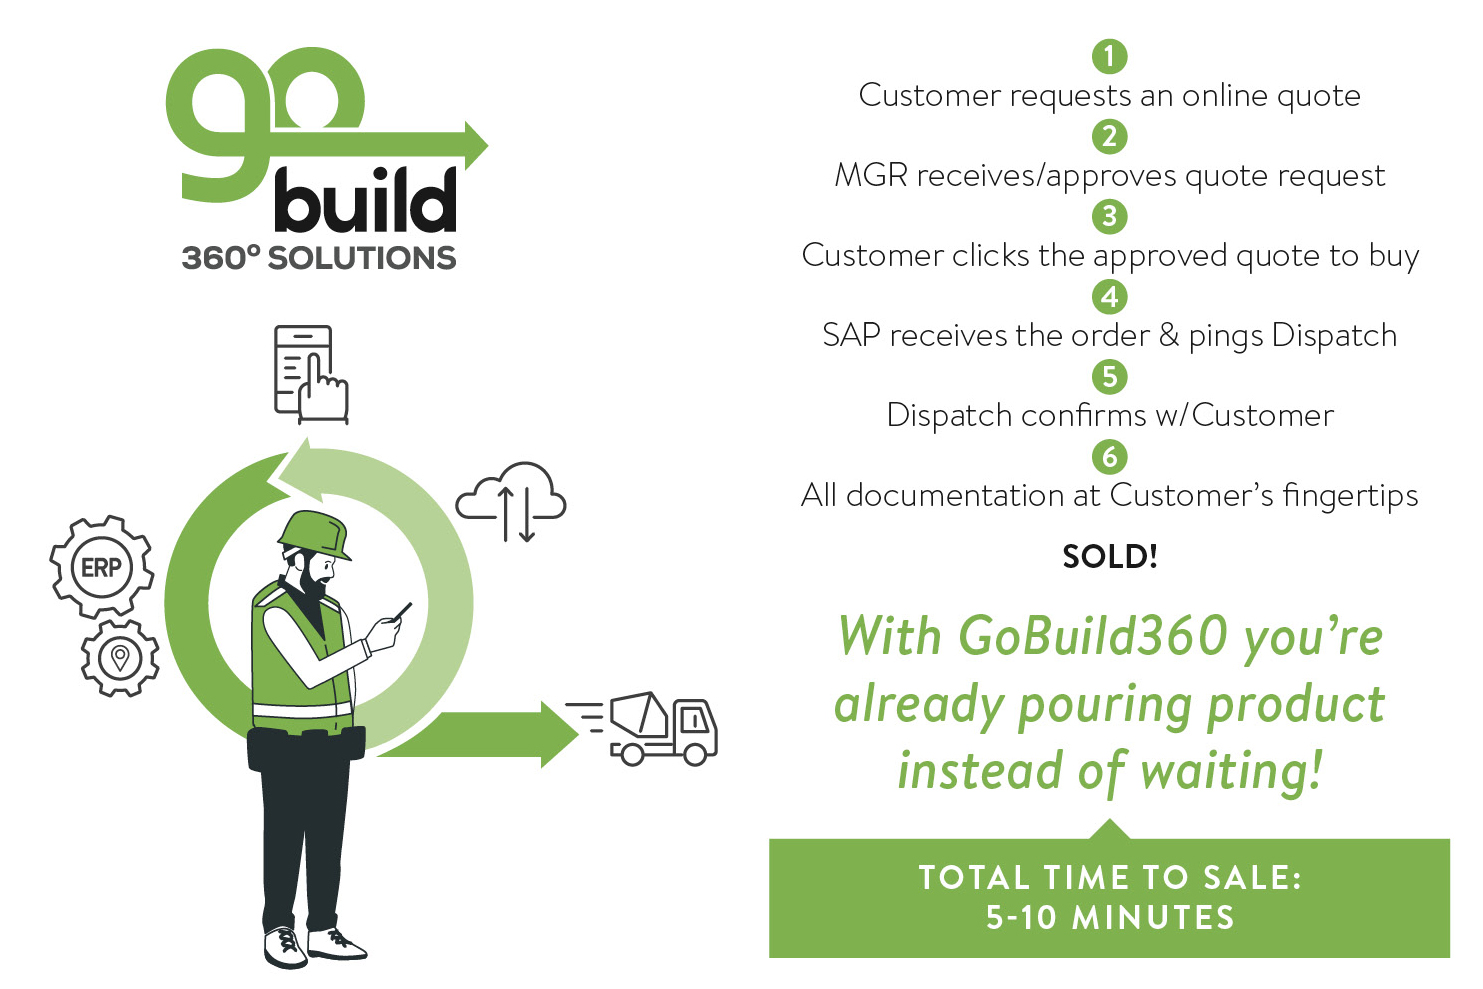 Gobuild360-ready-mix-concrete-ordering-process-graphic-on-white.jpg